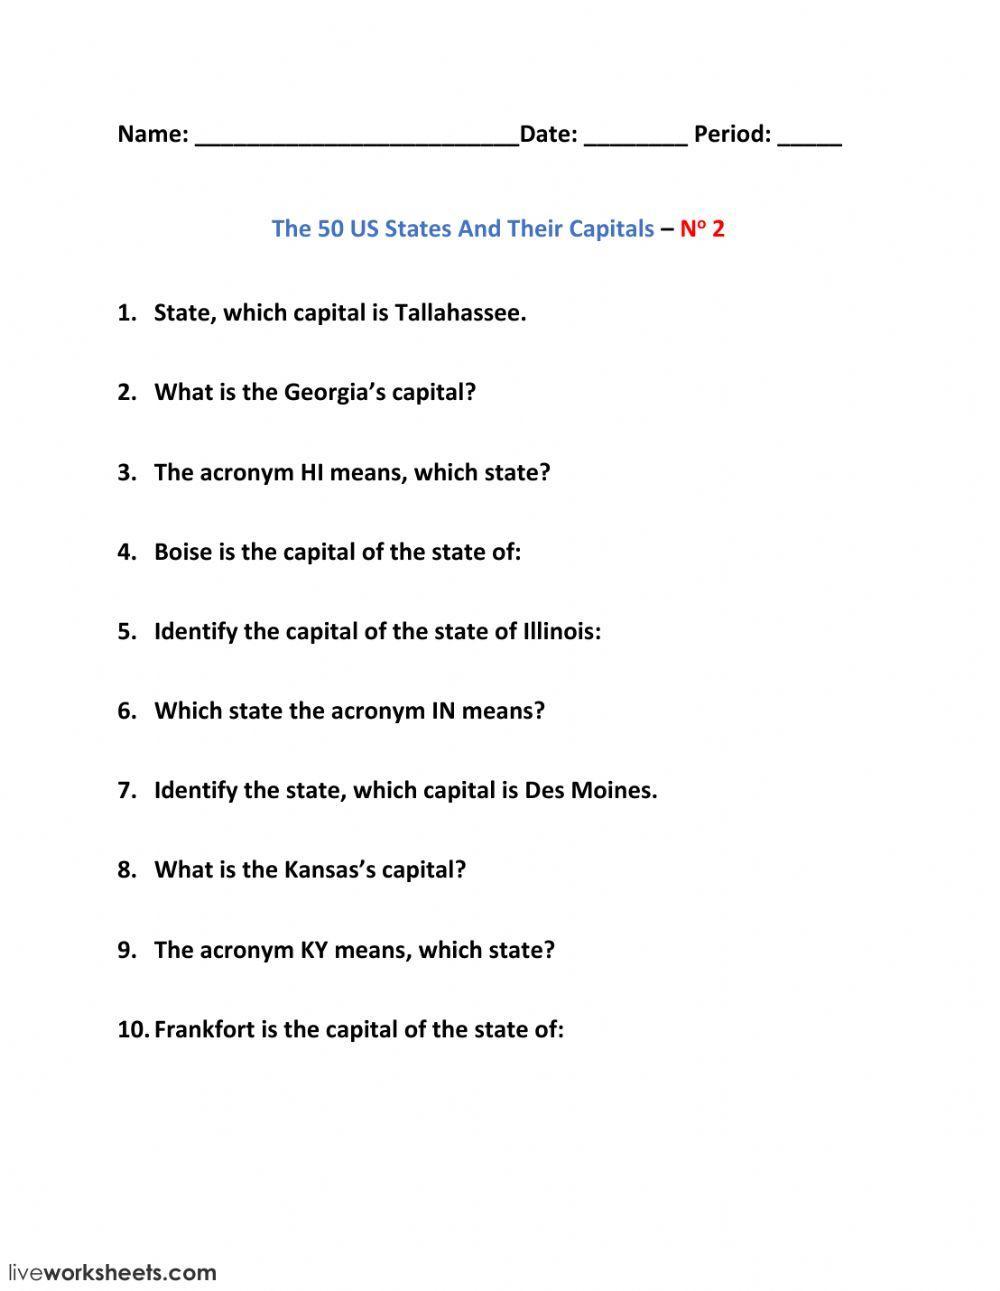 The 50 US States And Their Capitals – No 2